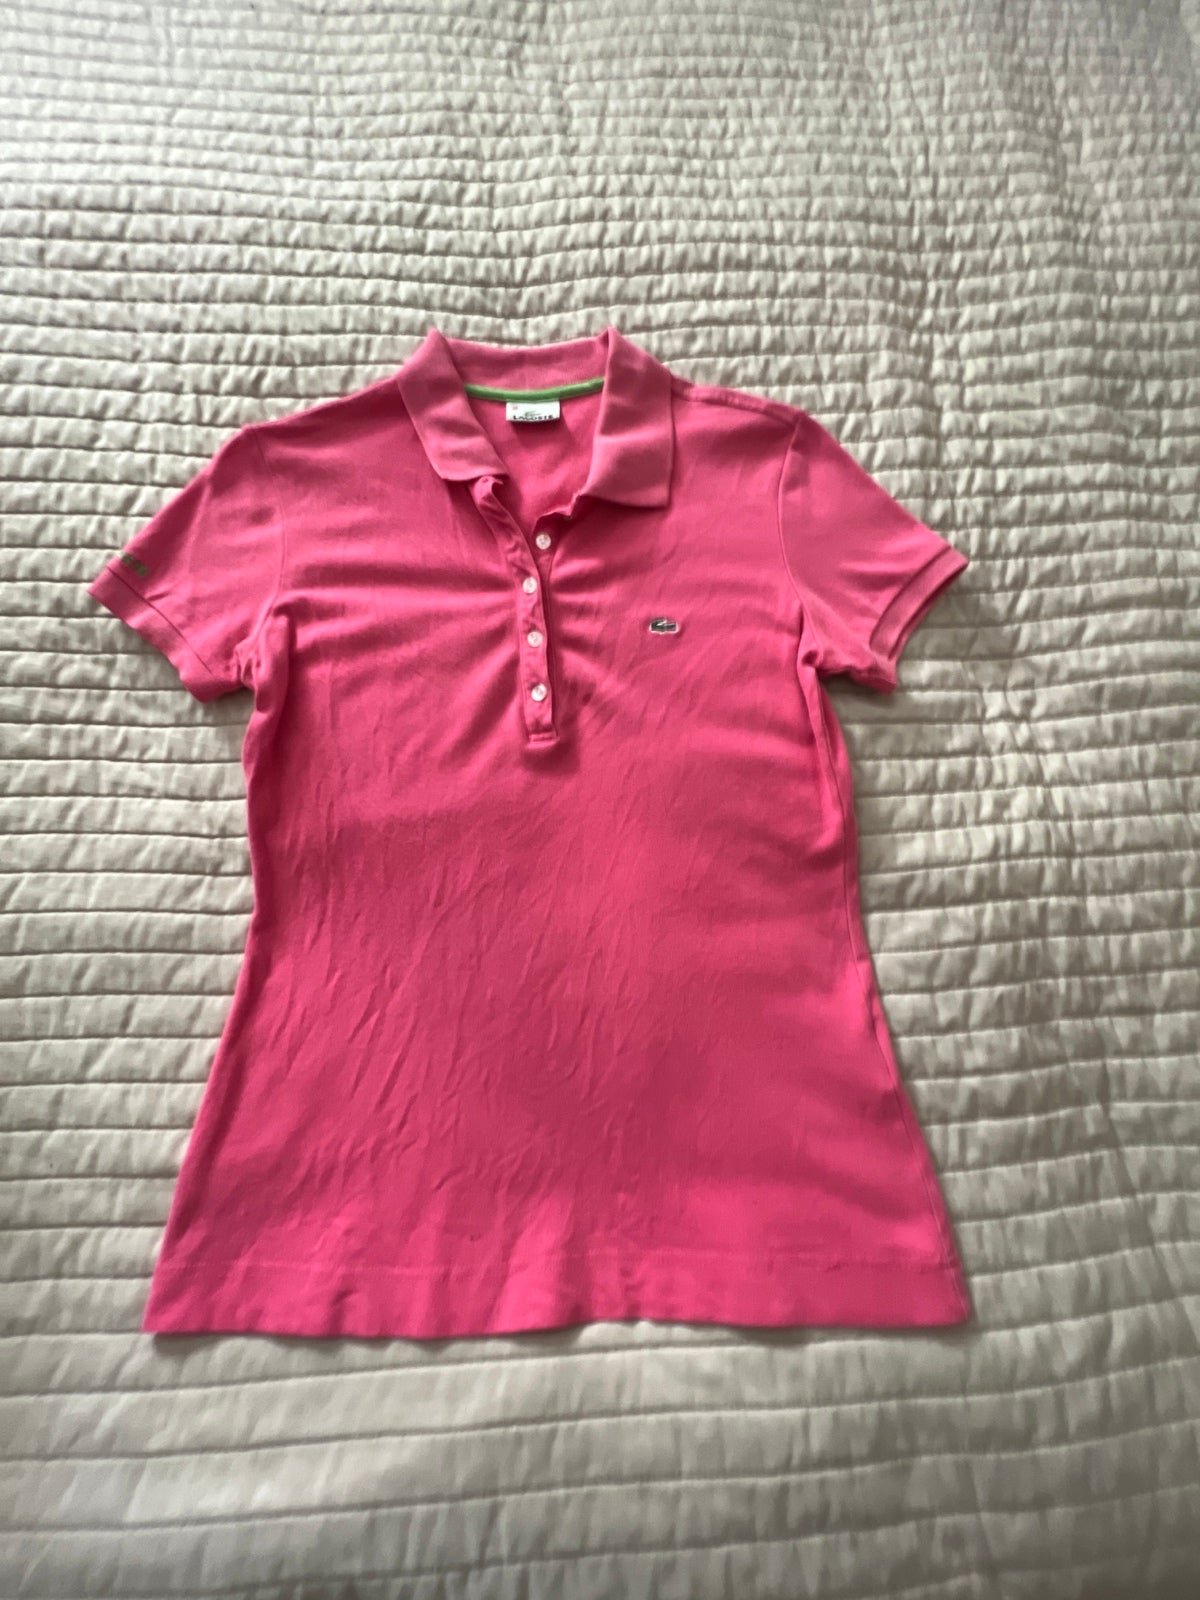 good price Lacoste Pink Short Sleeve polo shirt grXpshhGT Cheap